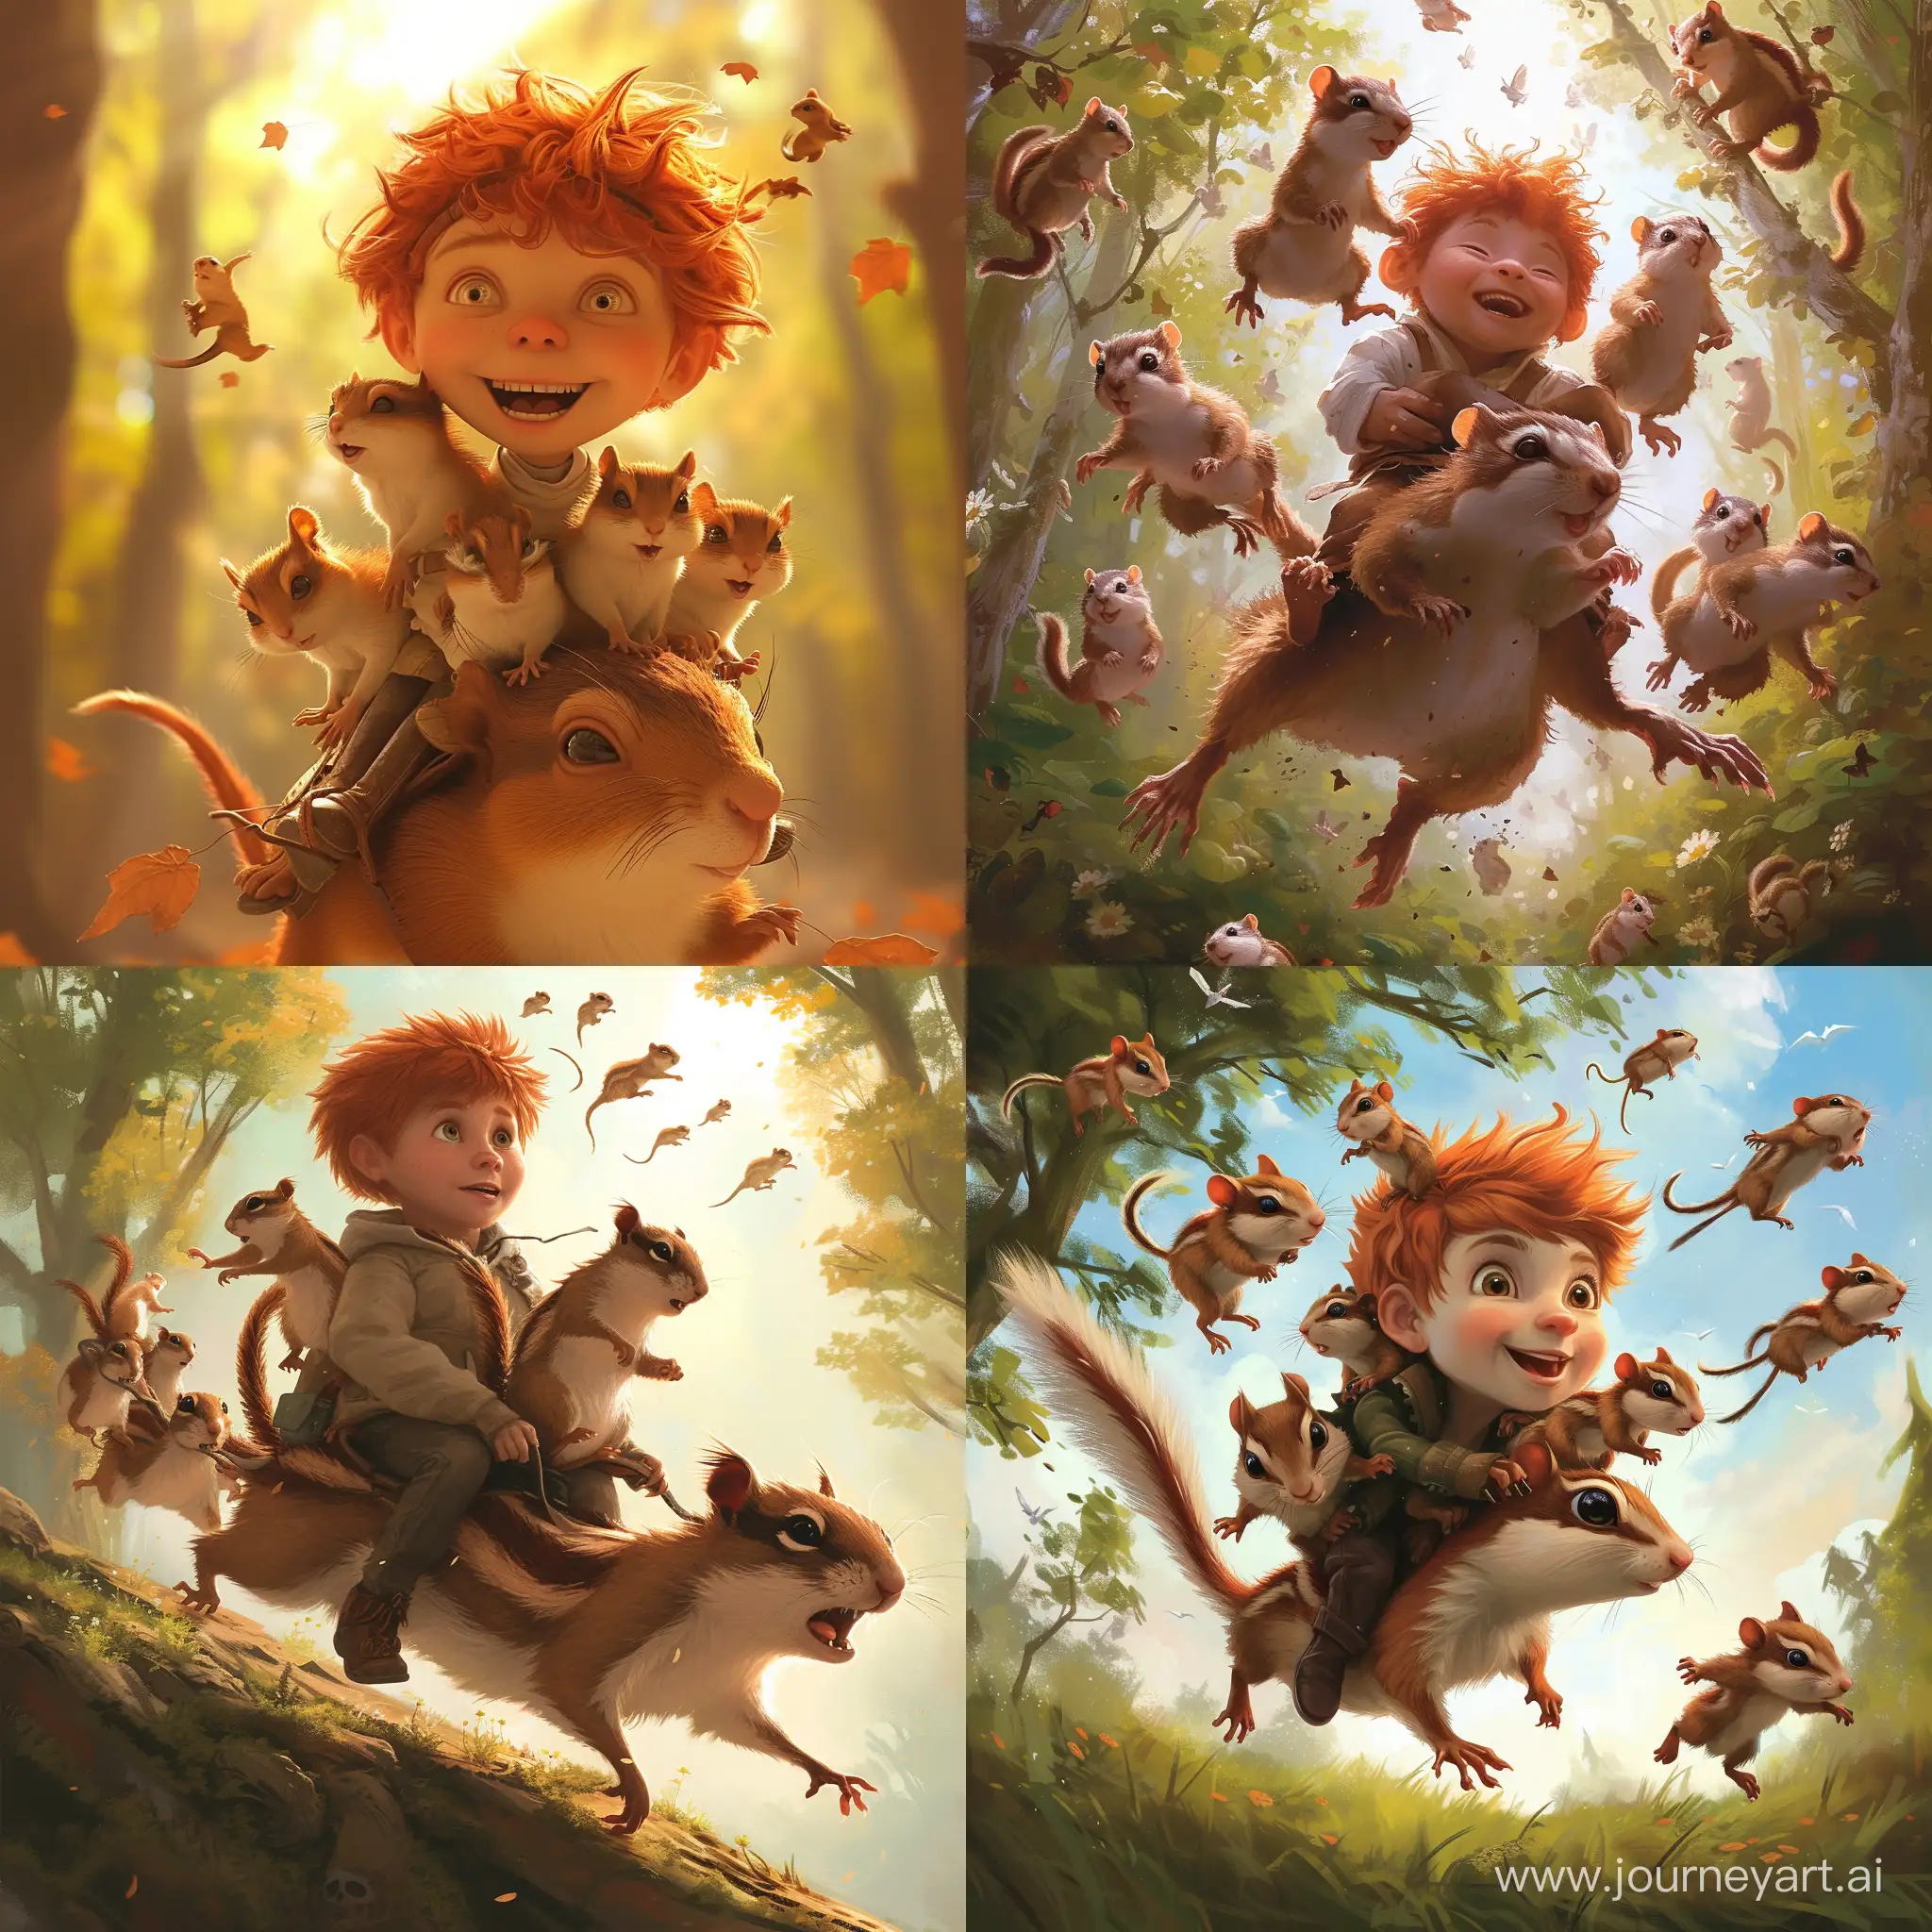 Playful-Chipmunks-Riding-on-a-RedHaired-Boy-Named-Ilya